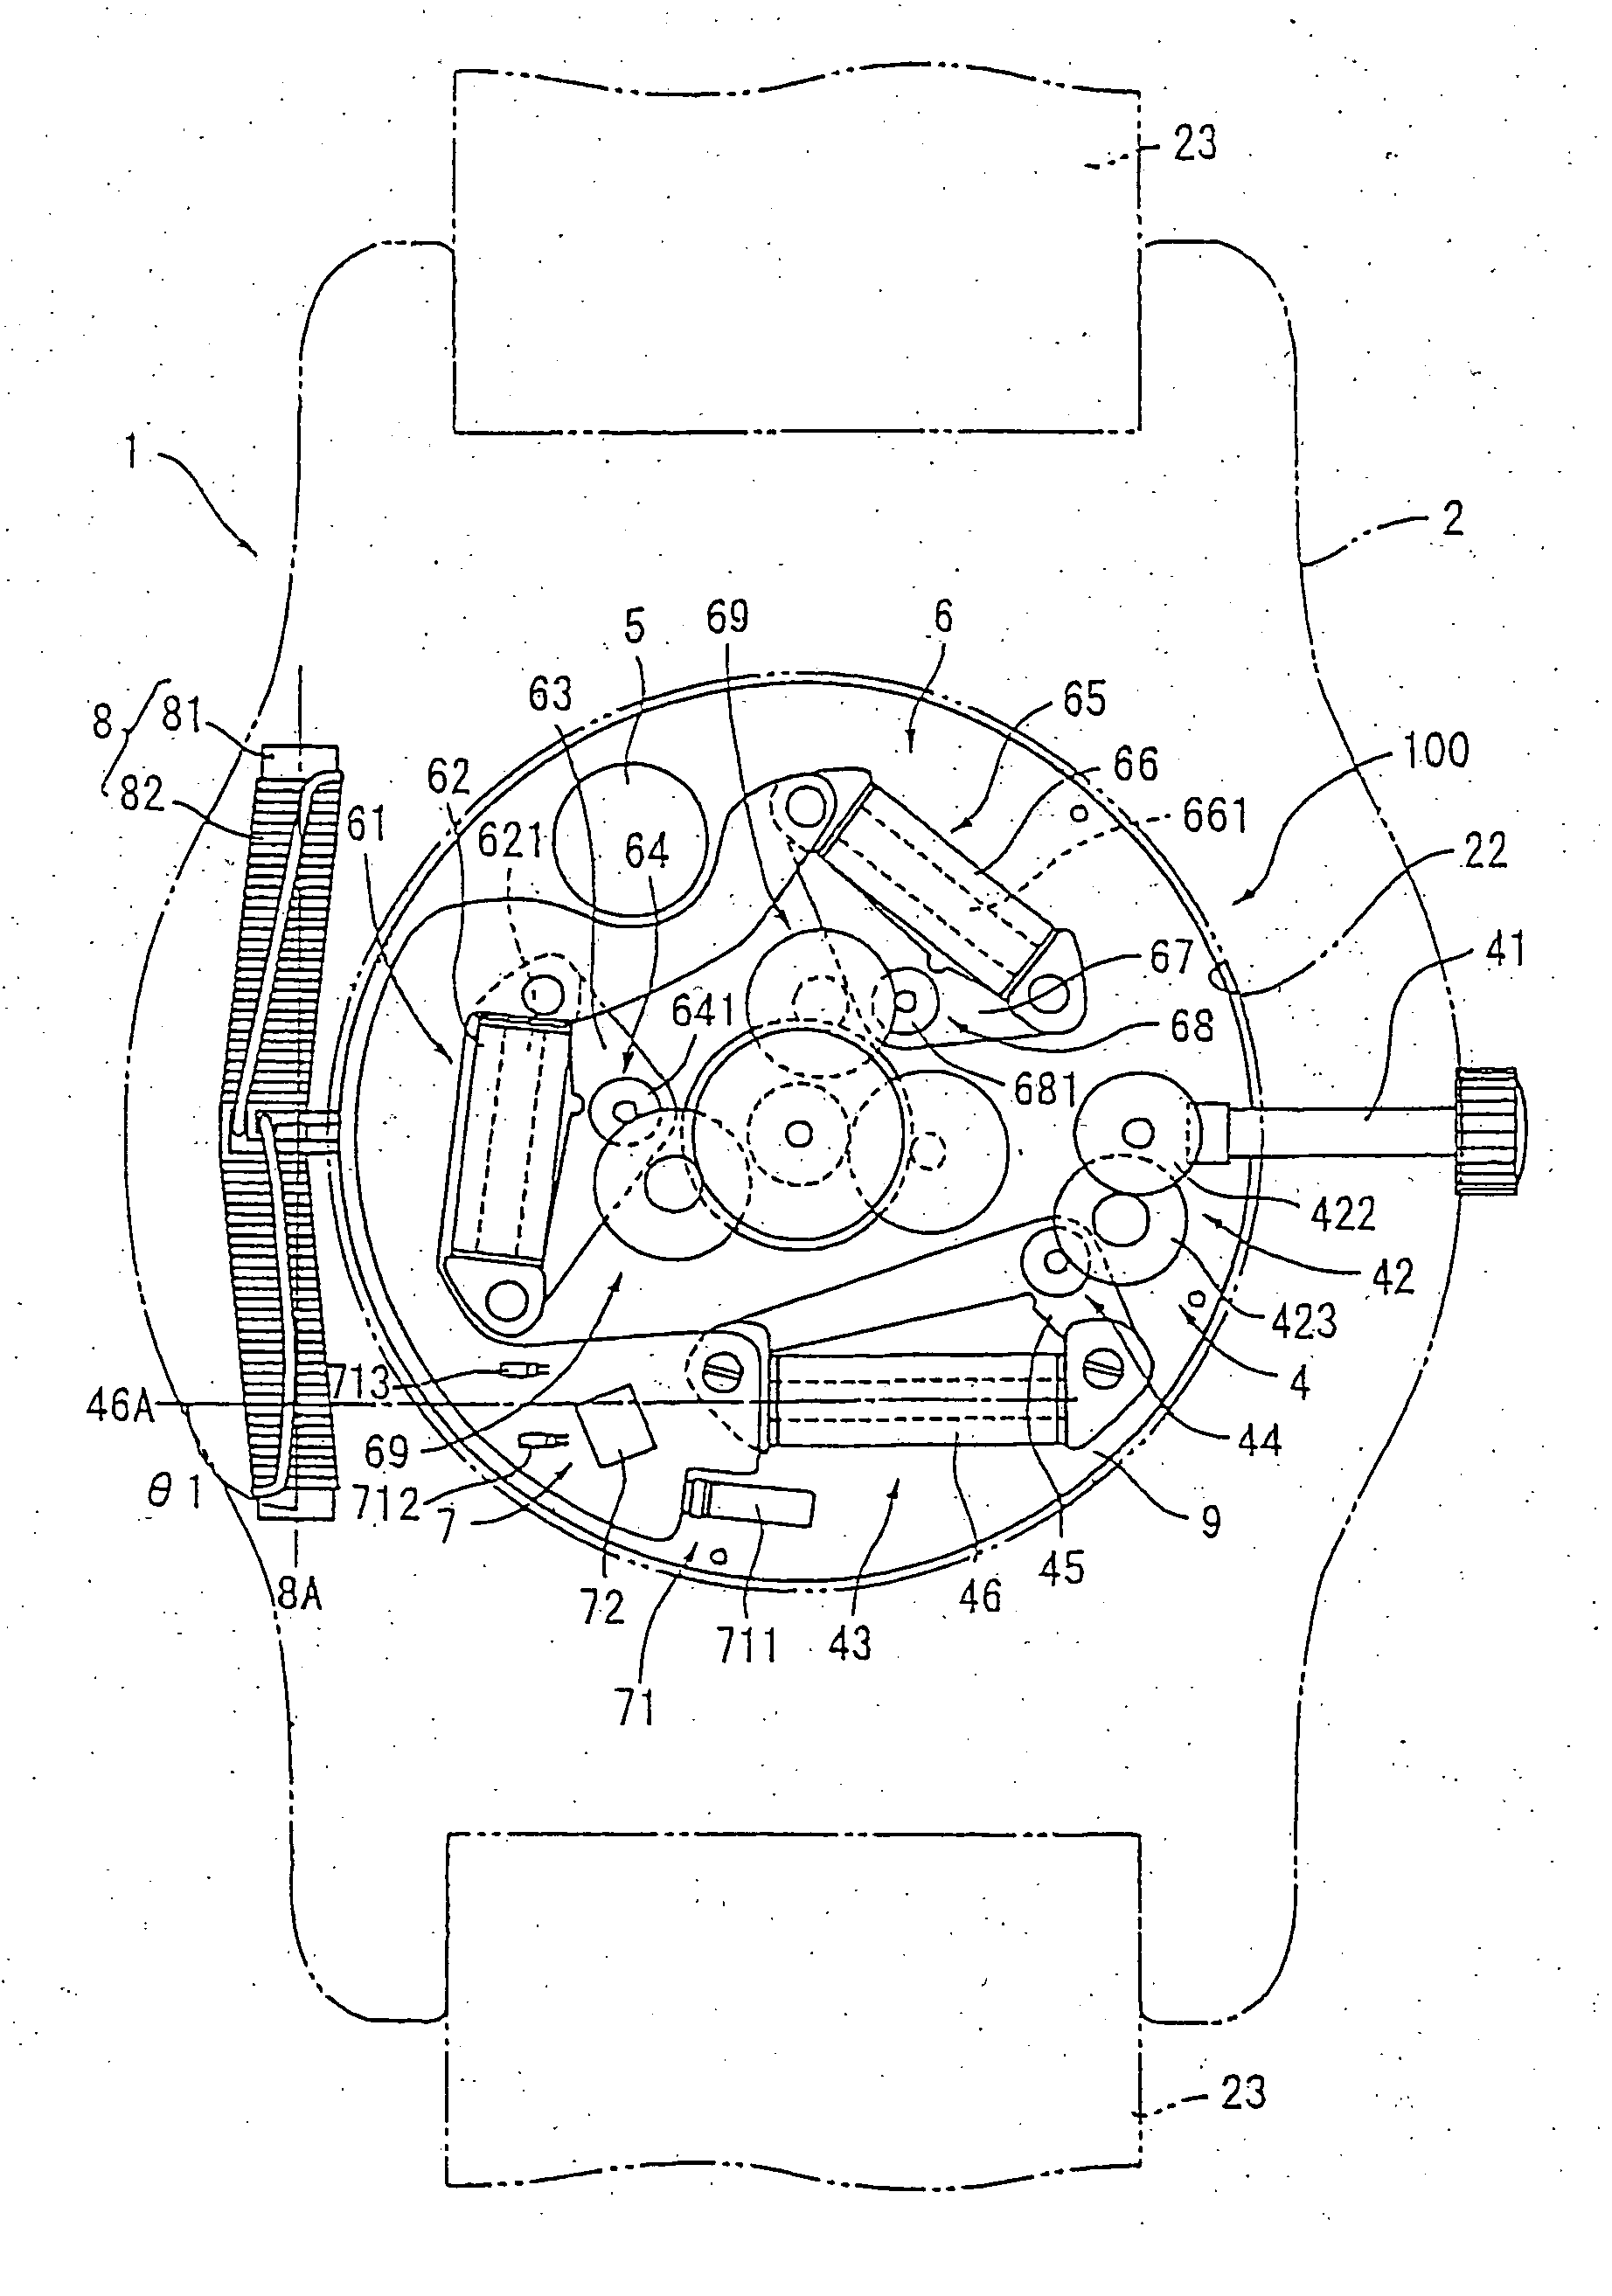 Electronic timepiece and electronic apparatus